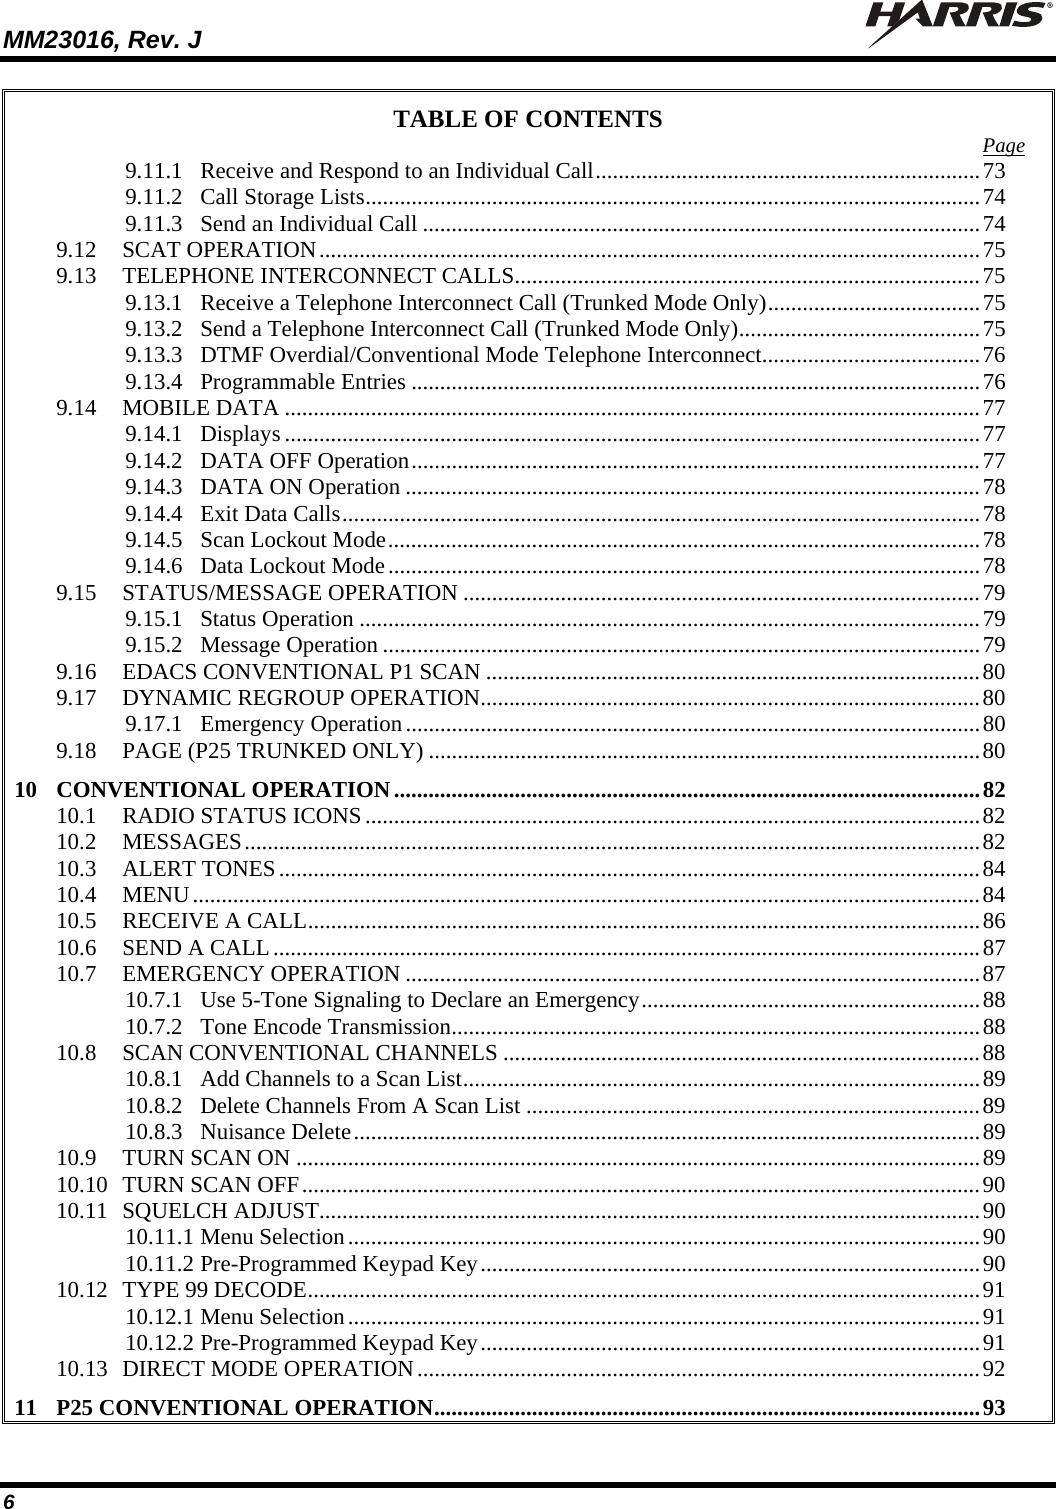 MM23016, Rev. J   6 TABLE OF CONTENTS  Page 9.11.1 Receive and Respond to an Individual Call...................................................................73 9.11.2 Call Storage Lists...........................................................................................................74 9.11.3 Send an Individual Call .................................................................................................74 9.12 SCAT OPERATION...................................................................................................................75 9.13 TELEPHONE INTERCONNECT CALLS.................................................................................75 9.13.1 Receive a Telephone Interconnect Call (Trunked Mode Only).....................................75 9.13.2 Send a Telephone Interconnect Call (Trunked Mode Only)..........................................75 9.13.3 DTMF Overdial/Conventional Mode Telephone Interconnect......................................76 9.13.4 Programmable Entries ...................................................................................................76 9.14 MOBILE DATA .........................................................................................................................77 9.14.1 Displays .........................................................................................................................77 9.14.2 DATA OFF Operation...................................................................................................77 9.14.3 DATA ON Operation ....................................................................................................78 9.14.4 Exit Data Calls...............................................................................................................78 9.14.5 Scan Lockout Mode.......................................................................................................78 9.14.6 Data Lockout Mode.......................................................................................................78 9.15 STATUS/MESSAGE OPERATION ..........................................................................................79 9.15.1 Status Operation ............................................................................................................79 9.15.2 Message Operation ........................................................................................................79 9.16 EDACS CONVENTIONAL P1 SCAN ......................................................................................80 9.17 DYNAMIC REGROUP OPERATION.......................................................................................80 9.17.1 Emergency Operation....................................................................................................80 9.18 PAGE (P25 TRUNKED ONLY) ................................................................................................80 10 CONVENTIONAL OPERATION......................................................................................................82 10.1 RADIO STATUS ICONS...........................................................................................................82 10.2 MESSAGES................................................................................................................................82 10.3 ALERT TONES..........................................................................................................................84 10.4 MENU.........................................................................................................................................84 10.5 RECEIVE A CALL.....................................................................................................................86 10.6 SEND A CALL...........................................................................................................................87 10.7 EMERGENCY OPERATION ....................................................................................................87 10.7.1 Use 5-Tone Signaling to Declare an Emergency...........................................................88 10.7.2 Tone Encode Transmission............................................................................................88 10.8 SCAN CONVENTIONAL CHANNELS ...................................................................................88 10.8.1 Add Channels to a Scan List..........................................................................................89 10.8.2 Delete Channels From A Scan List ...............................................................................89 10.8.3 Nuisance Delete.............................................................................................................89 10.9 TURN SCAN ON .......................................................................................................................89 10.10 TURN SCAN OFF......................................................................................................................90 10.11 SQUELCH ADJUST...................................................................................................................90 10.11.1 Menu Selection..............................................................................................................90 10.11.2 Pre-Programmed Keypad Key.......................................................................................90 10.12 TYPE 99 DECODE.....................................................................................................................91 10.12.1 Menu Selection..............................................................................................................91 10.12.2 Pre-Programmed Keypad Key.......................................................................................91 10.13 DIRECT MODE OPERATION..................................................................................................92 11 P25 CONVENTIONAL OPERATION...............................................................................................93 